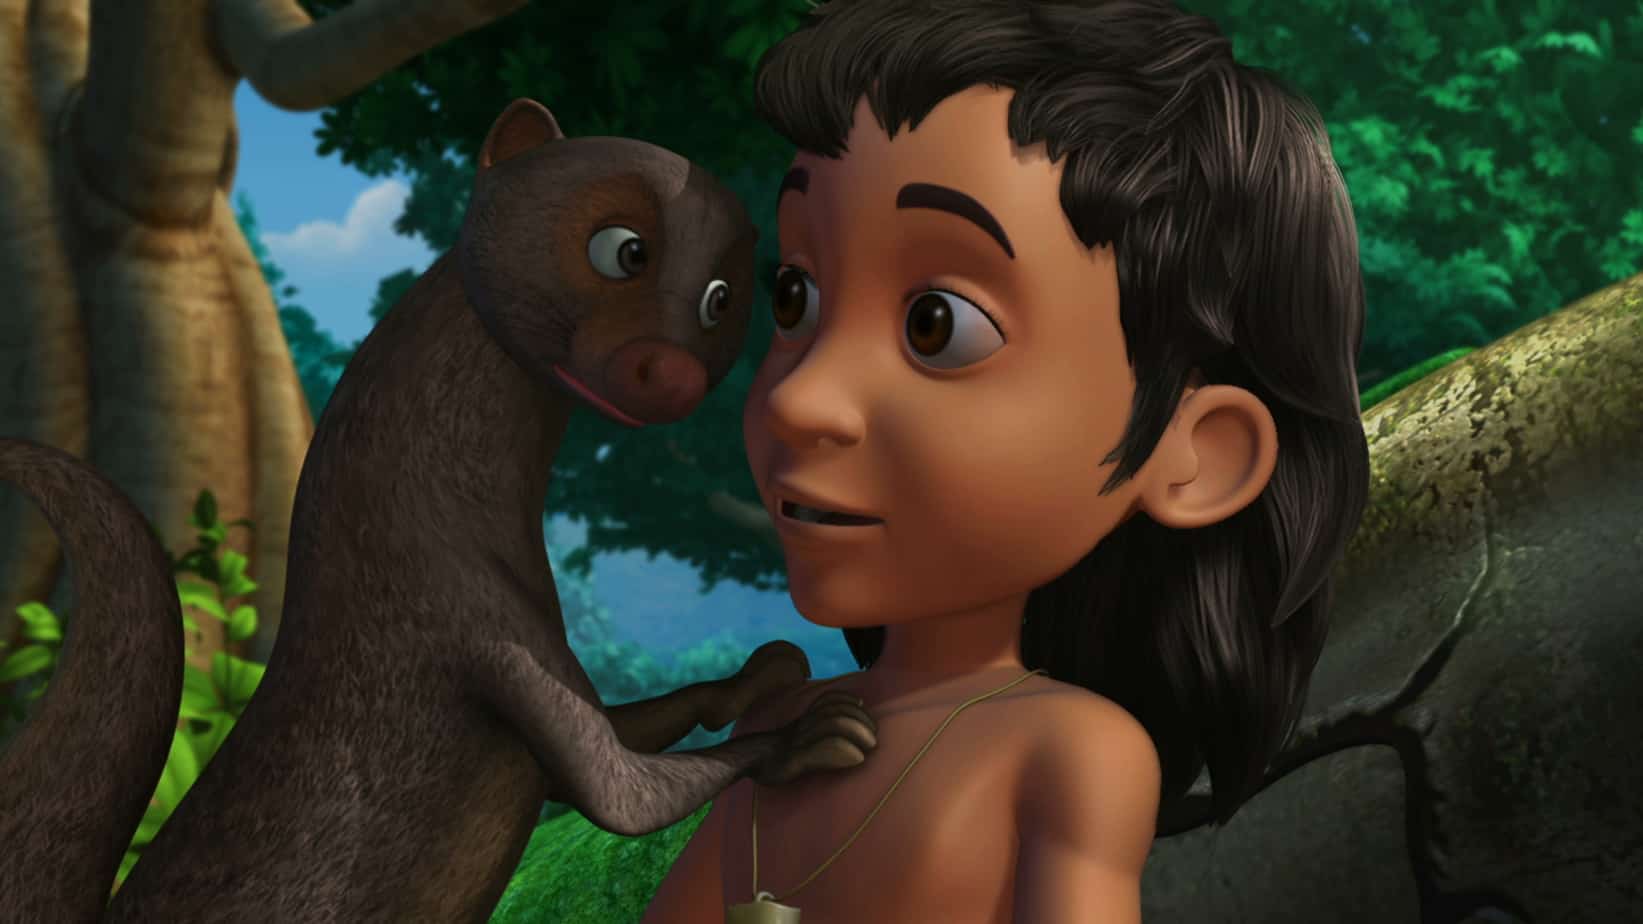 The Jungle Book The Movie: Rumble in the Jungle Out February 12